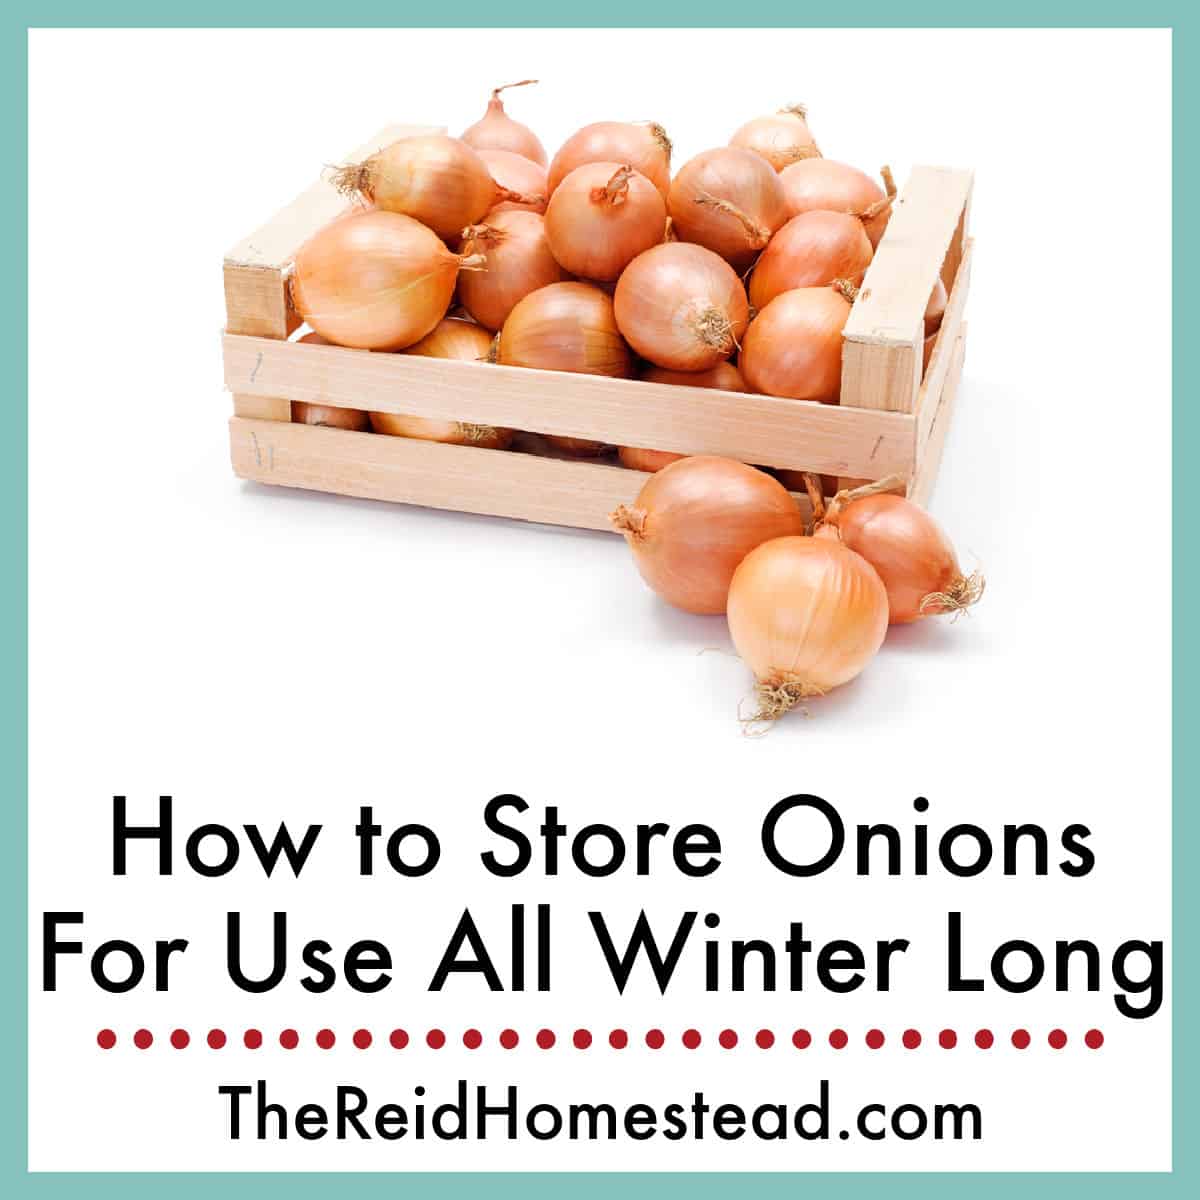 a wooden crate holding onions with text overlay How to Store Onions for Use All Winter Long